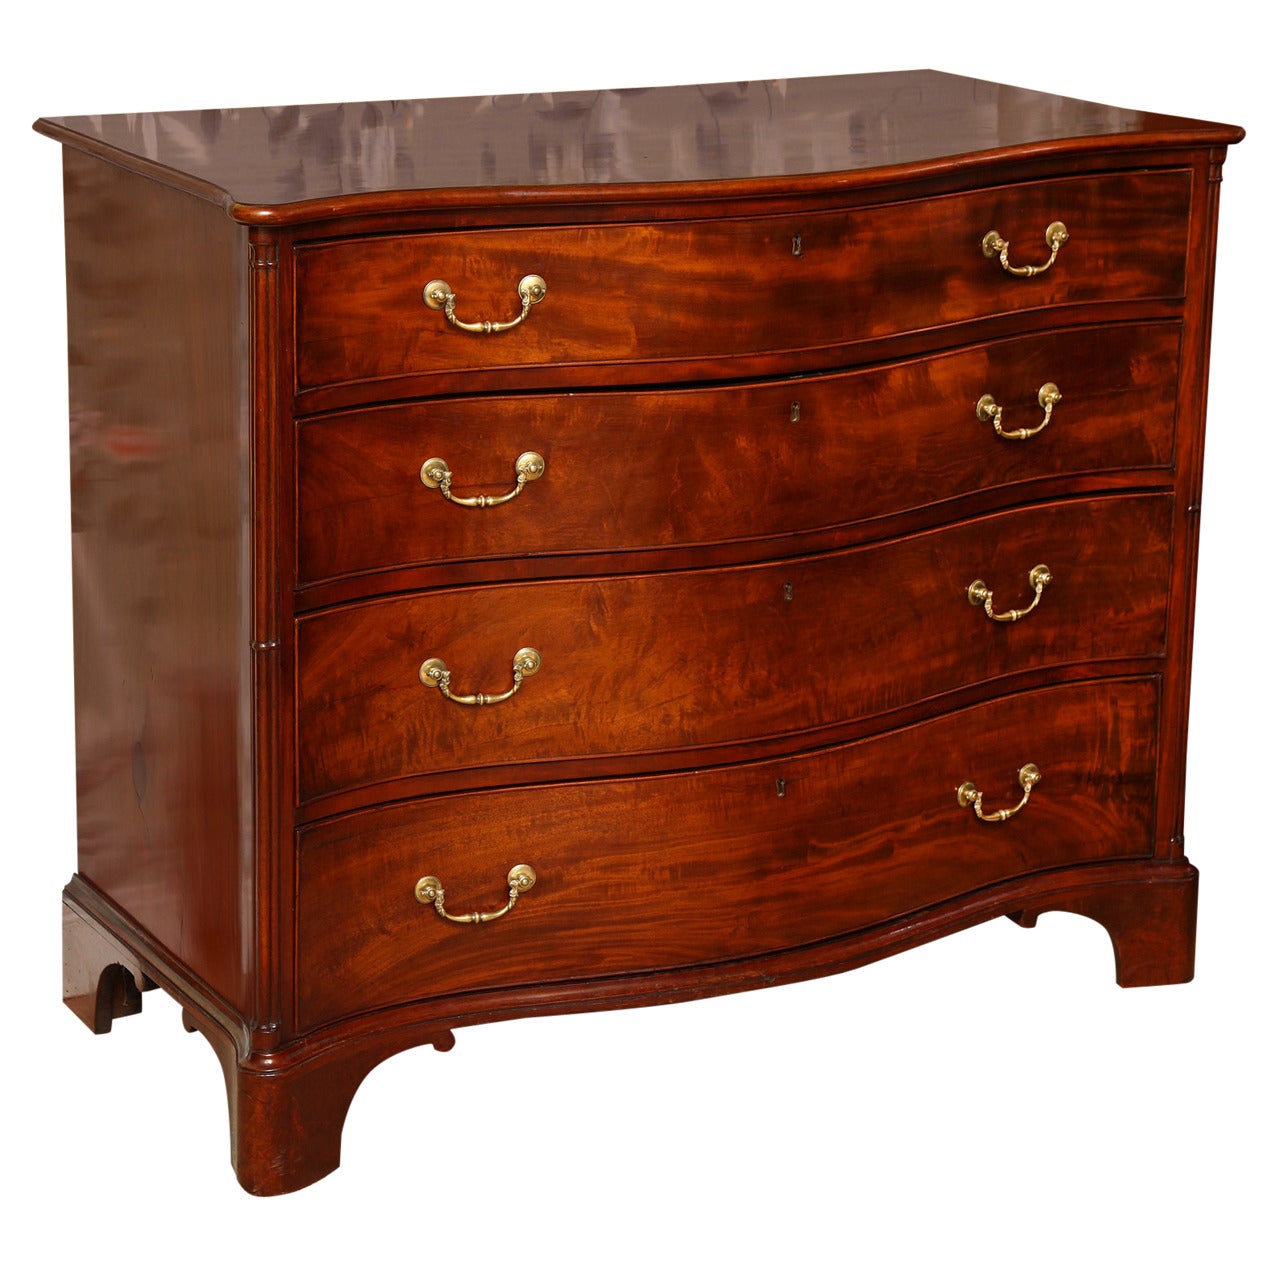 Chippendale Period Serpentine Mahogany Chest of Drawers, English, circa 1765